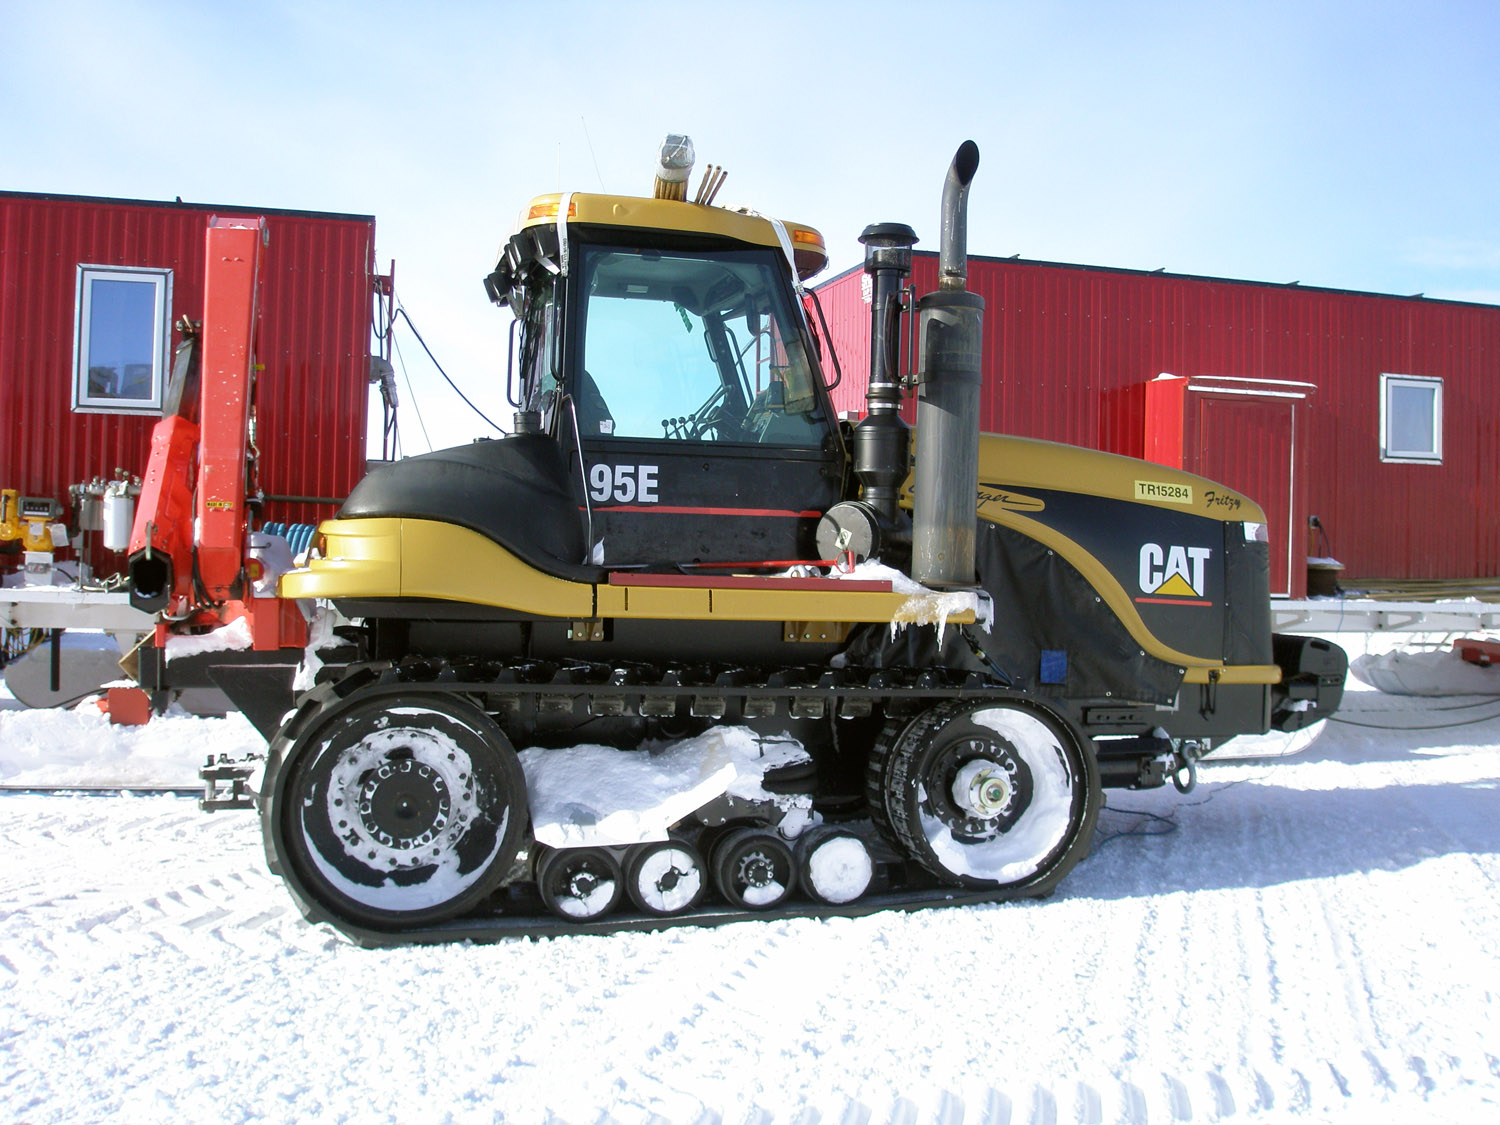 Vehicles and equipment of the South Pole Traverse - 08